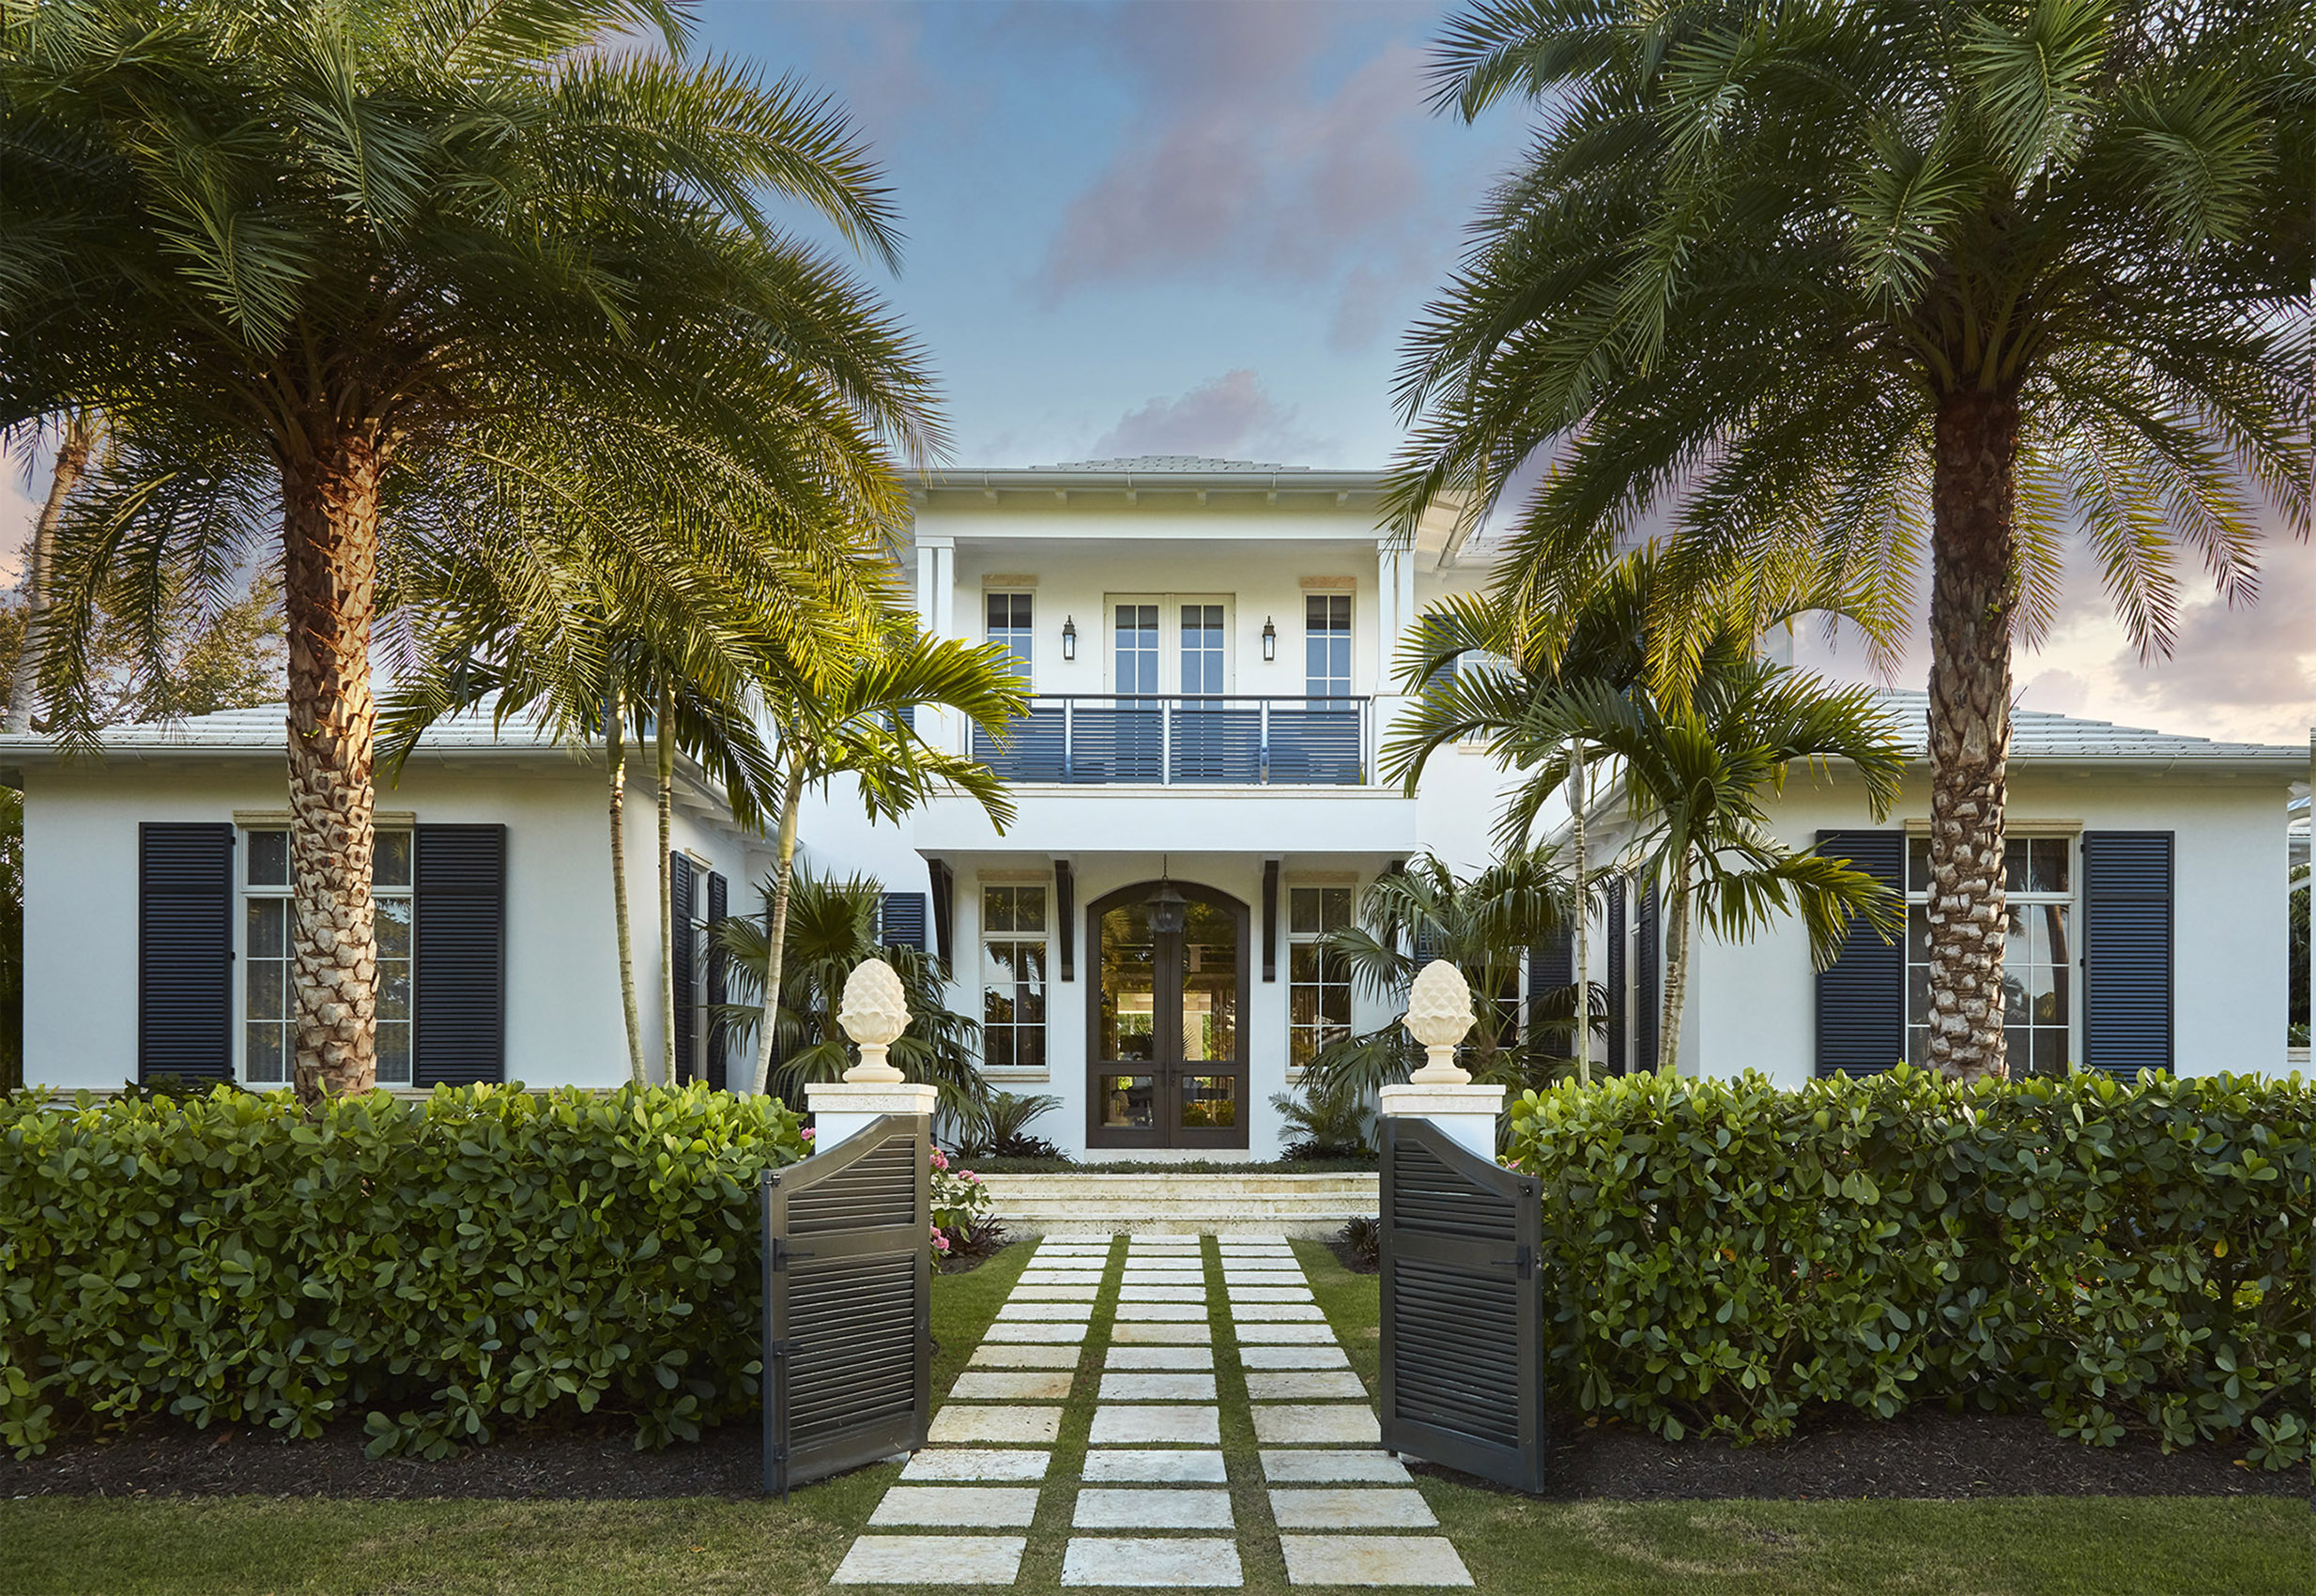 Exterior of a home located in Old Naples, FL, interior design by Summer Thornton, exterior by Kukk Architecture